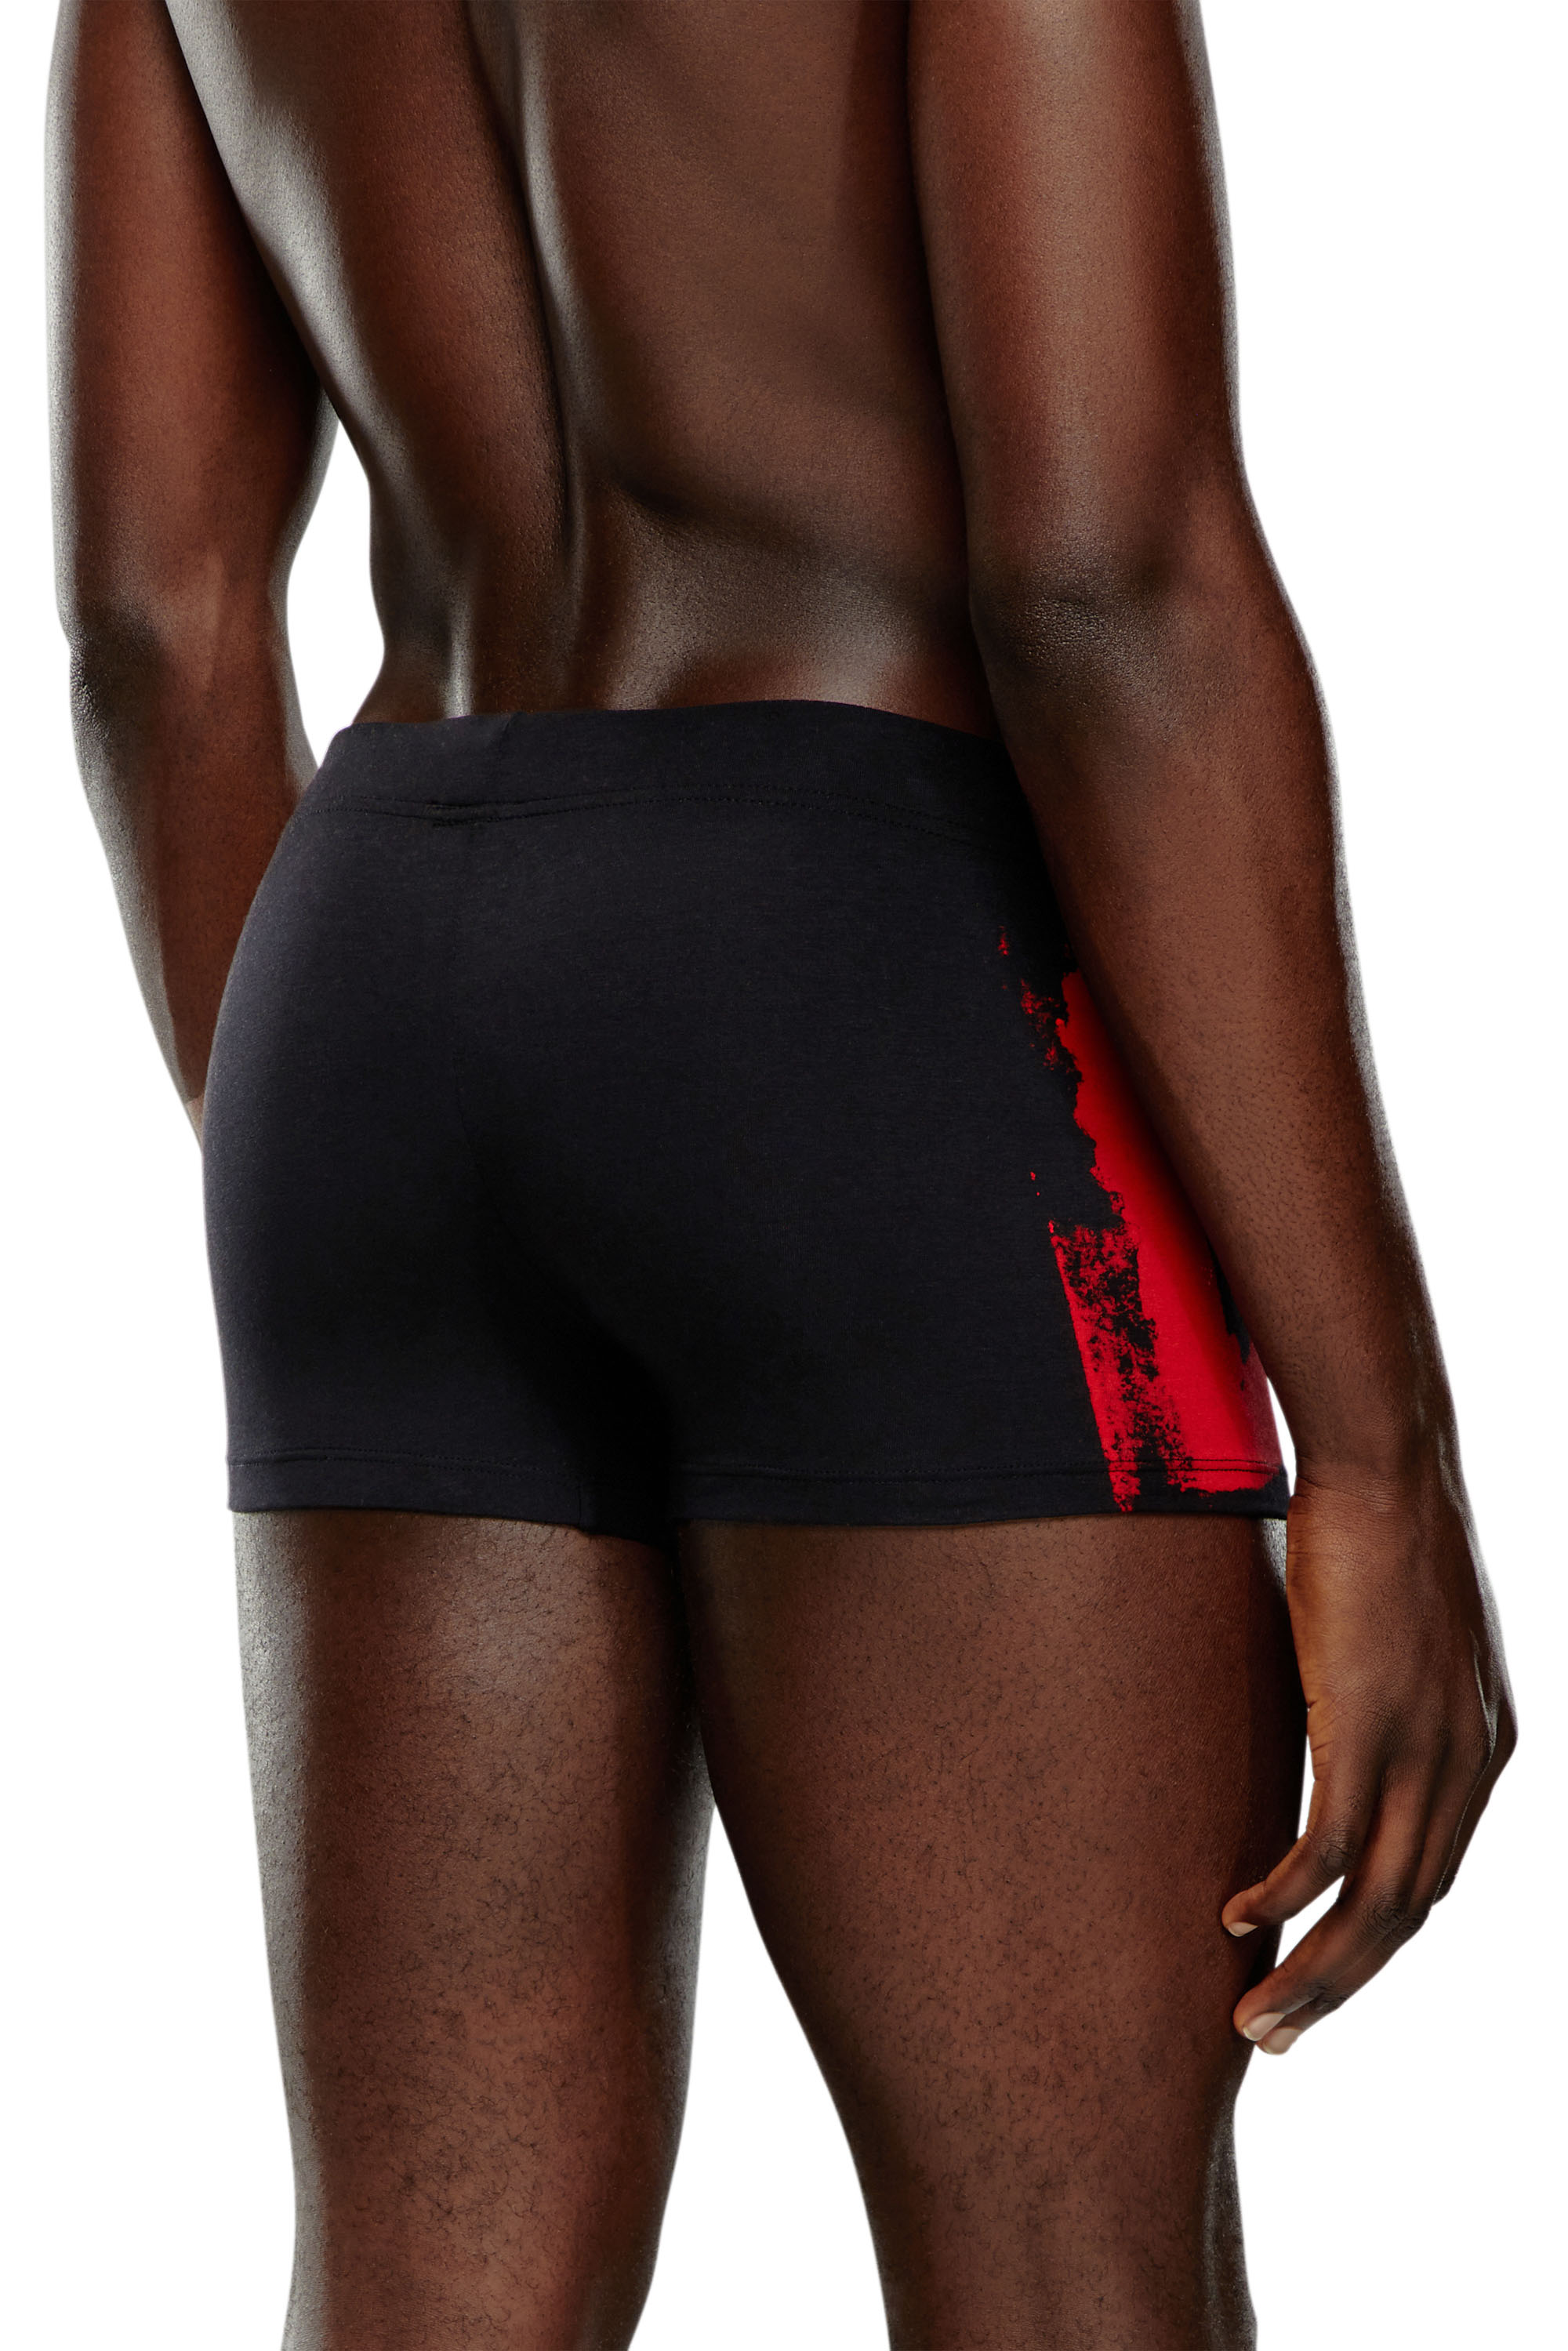 Buy Starter men 3 pk performance boxer briefs red and grey and black Online